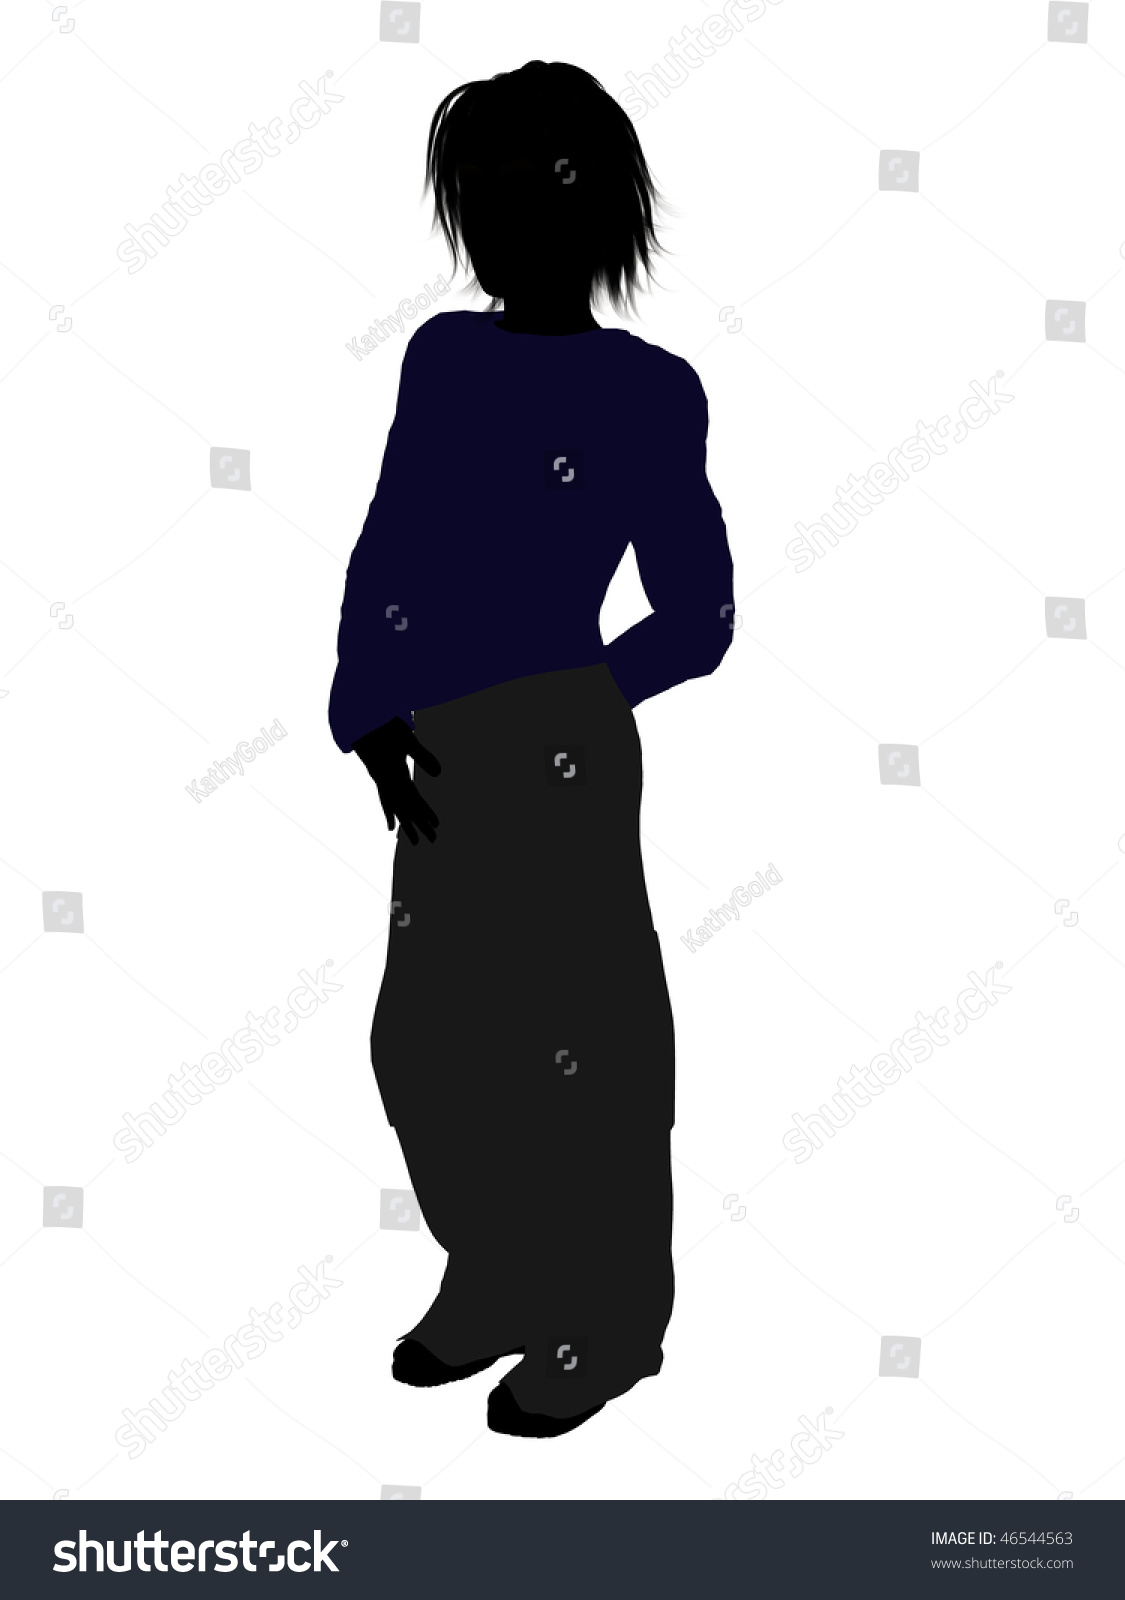 Teenager silhouette on a white background #46544563